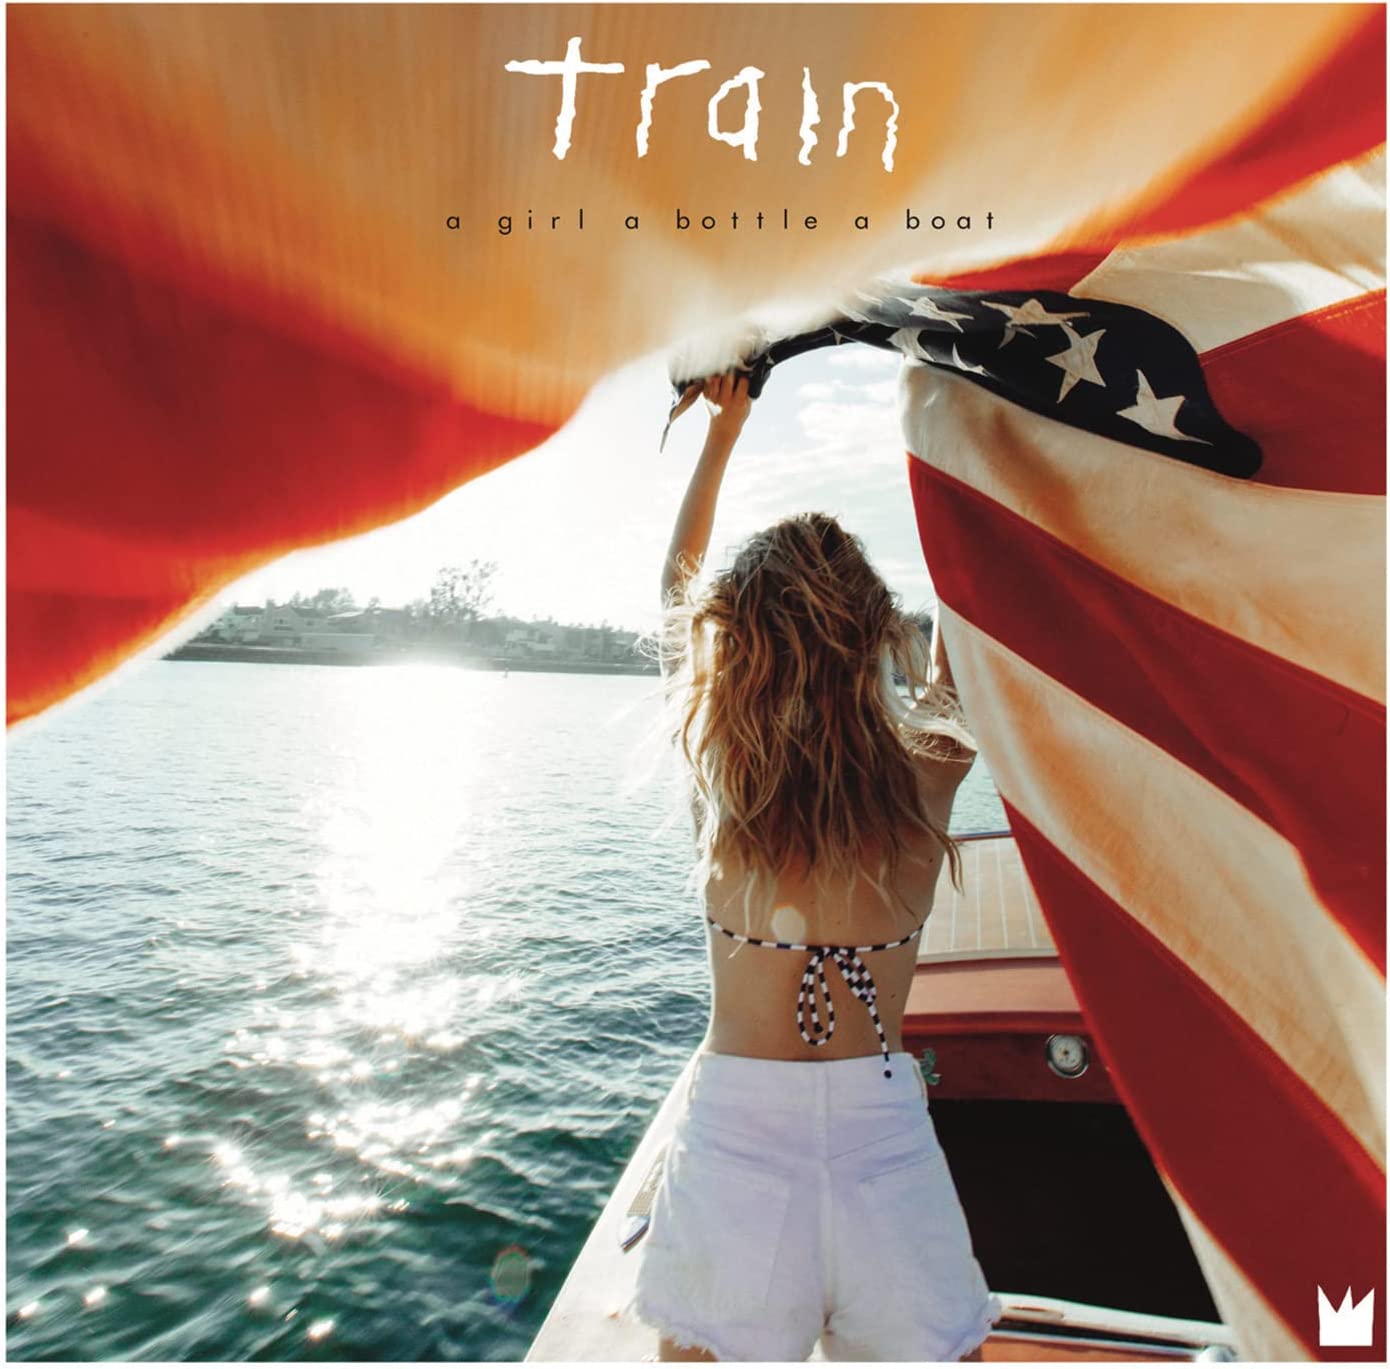 Train – A Girl A Bottle A Boat- USED CD